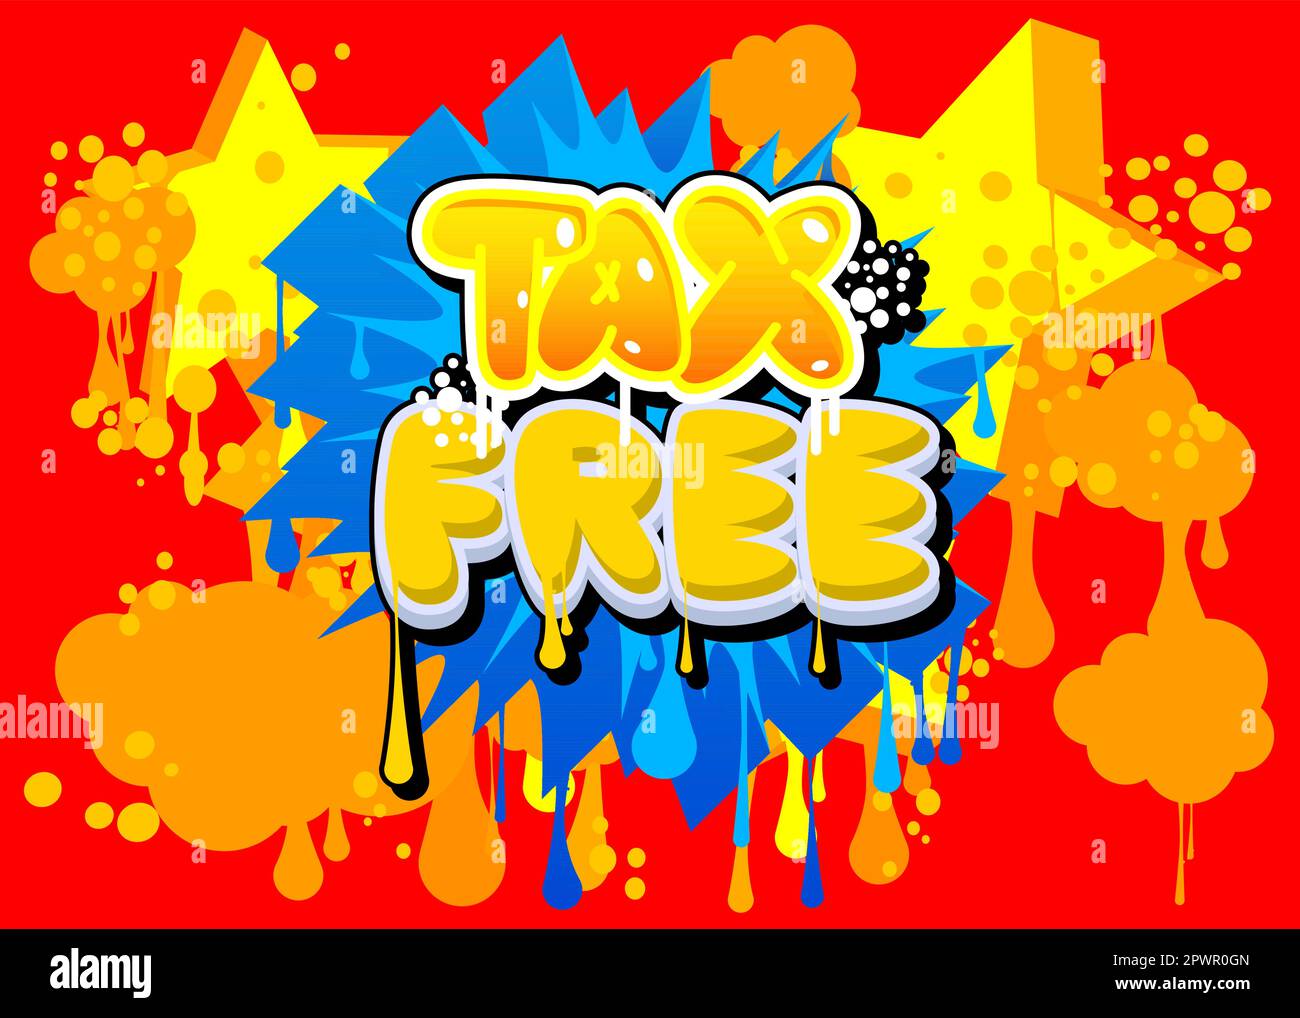 Tax Free. Graffiti tag. Abstract modern street art decoration performed in urban painting style. Stock Vector